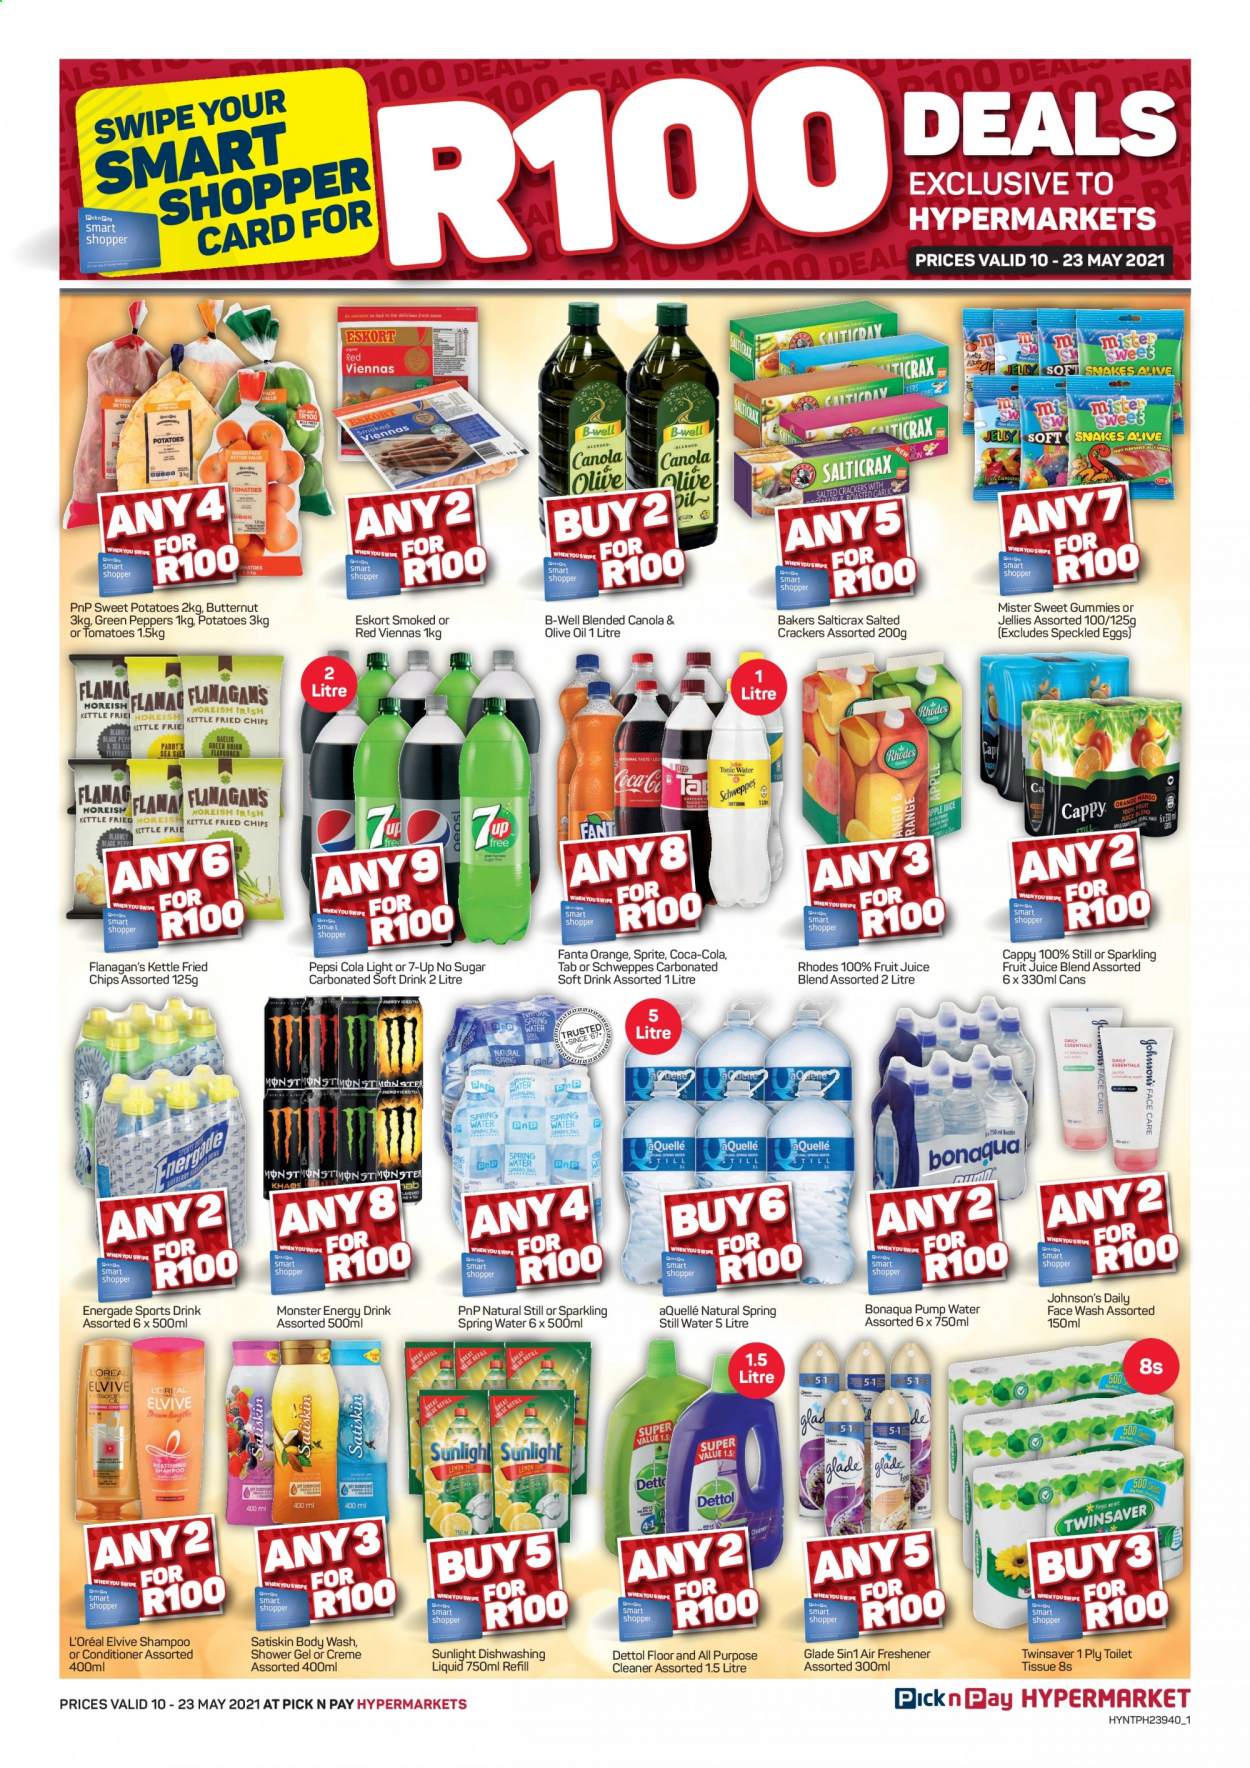 Pick n Pay specials - 05.10.2021 - 05.23.2021. 